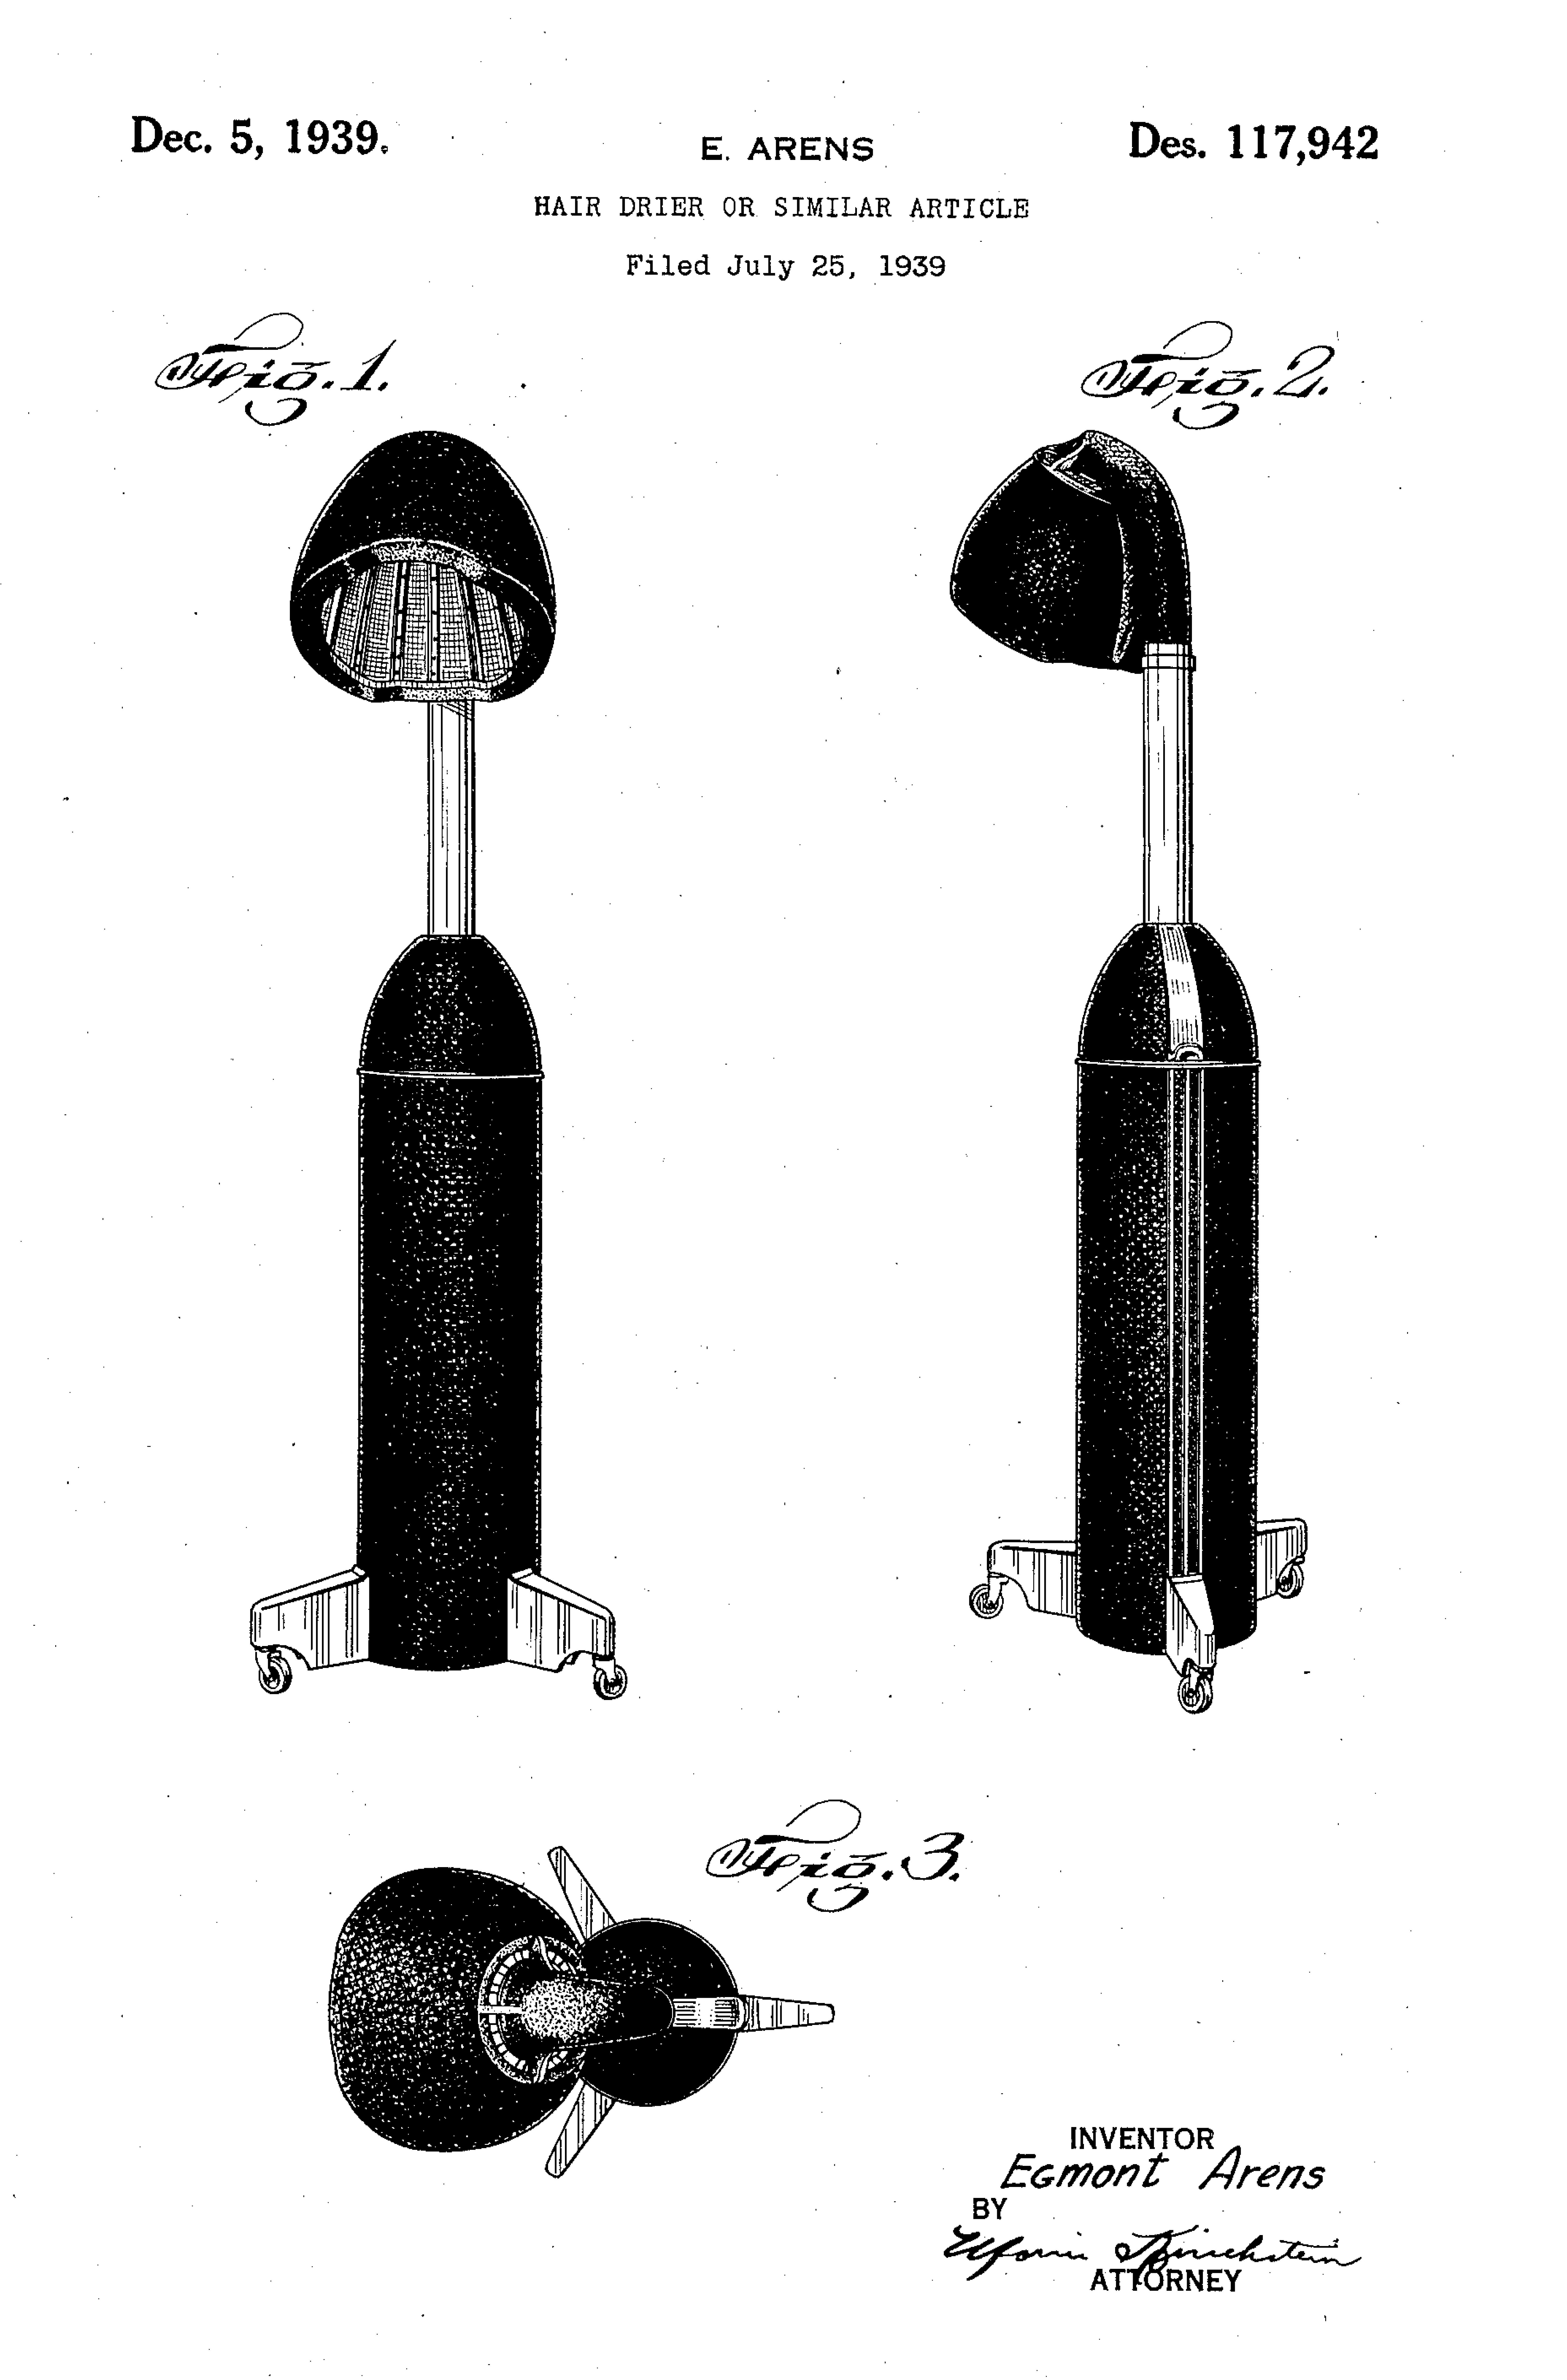 Hair Dryer or Similar Article, Egmont Arens, for Nestle-Lemur Company, 1939. Patent Number: USD 117,942, U.S. Patent Office 